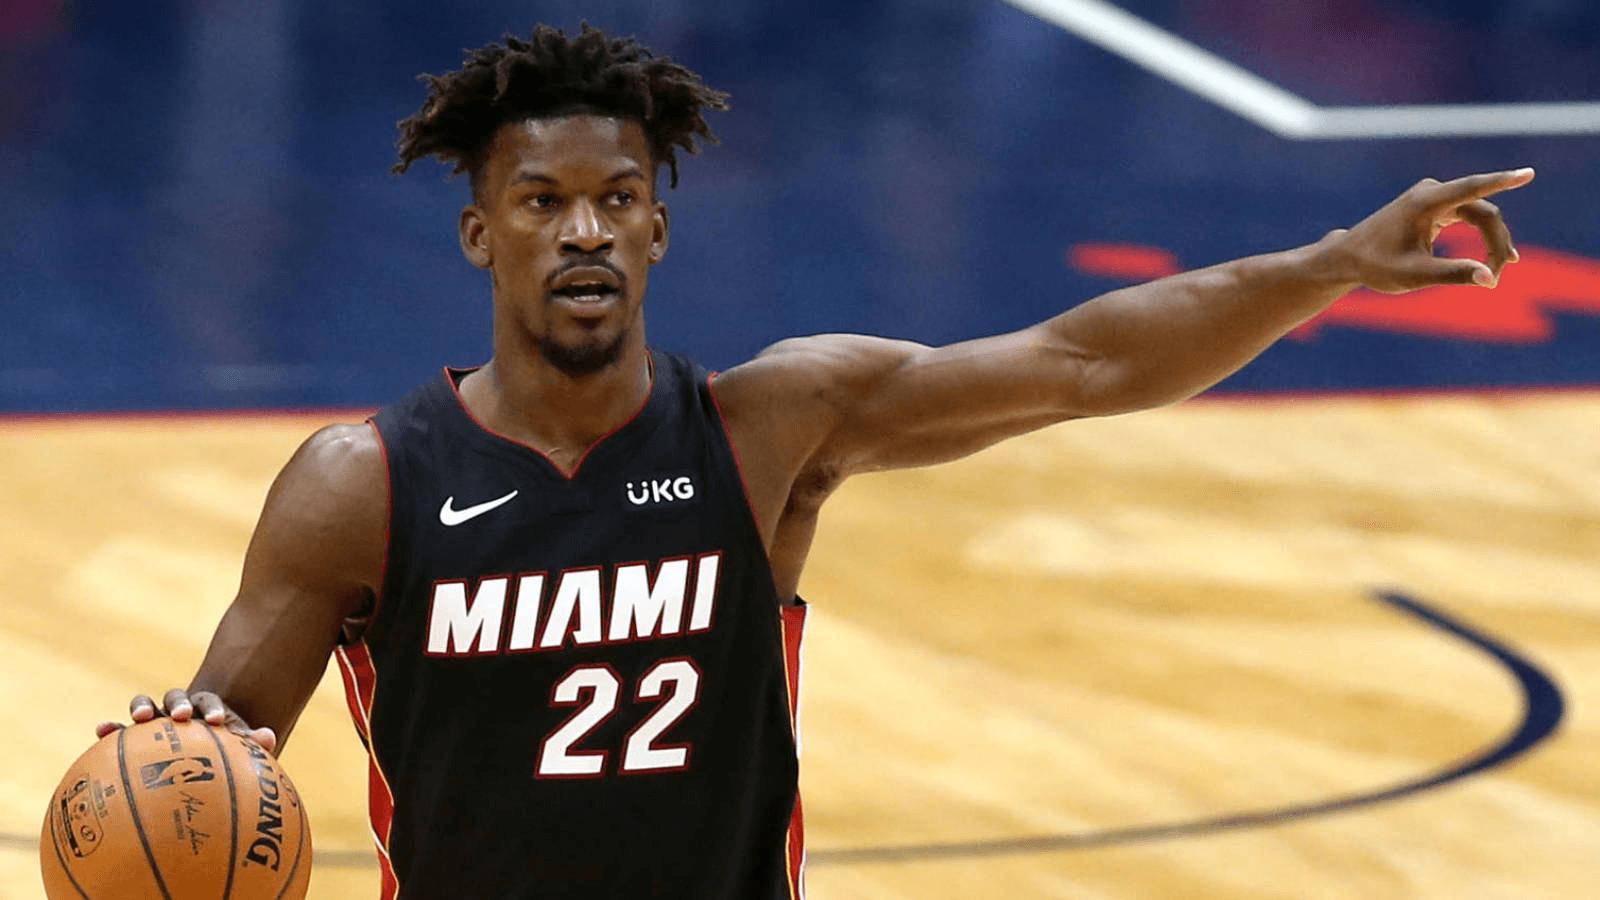 Mar 4, 2021; New Orleans, Louisiana, USA; Miami Heat forward Jimmy Butler (22) gestures in the first quarter against the New Orleans Pelicans at the Smoothie King Center. Mandatory Credit: Chuck Cook-USA TODAY Sports